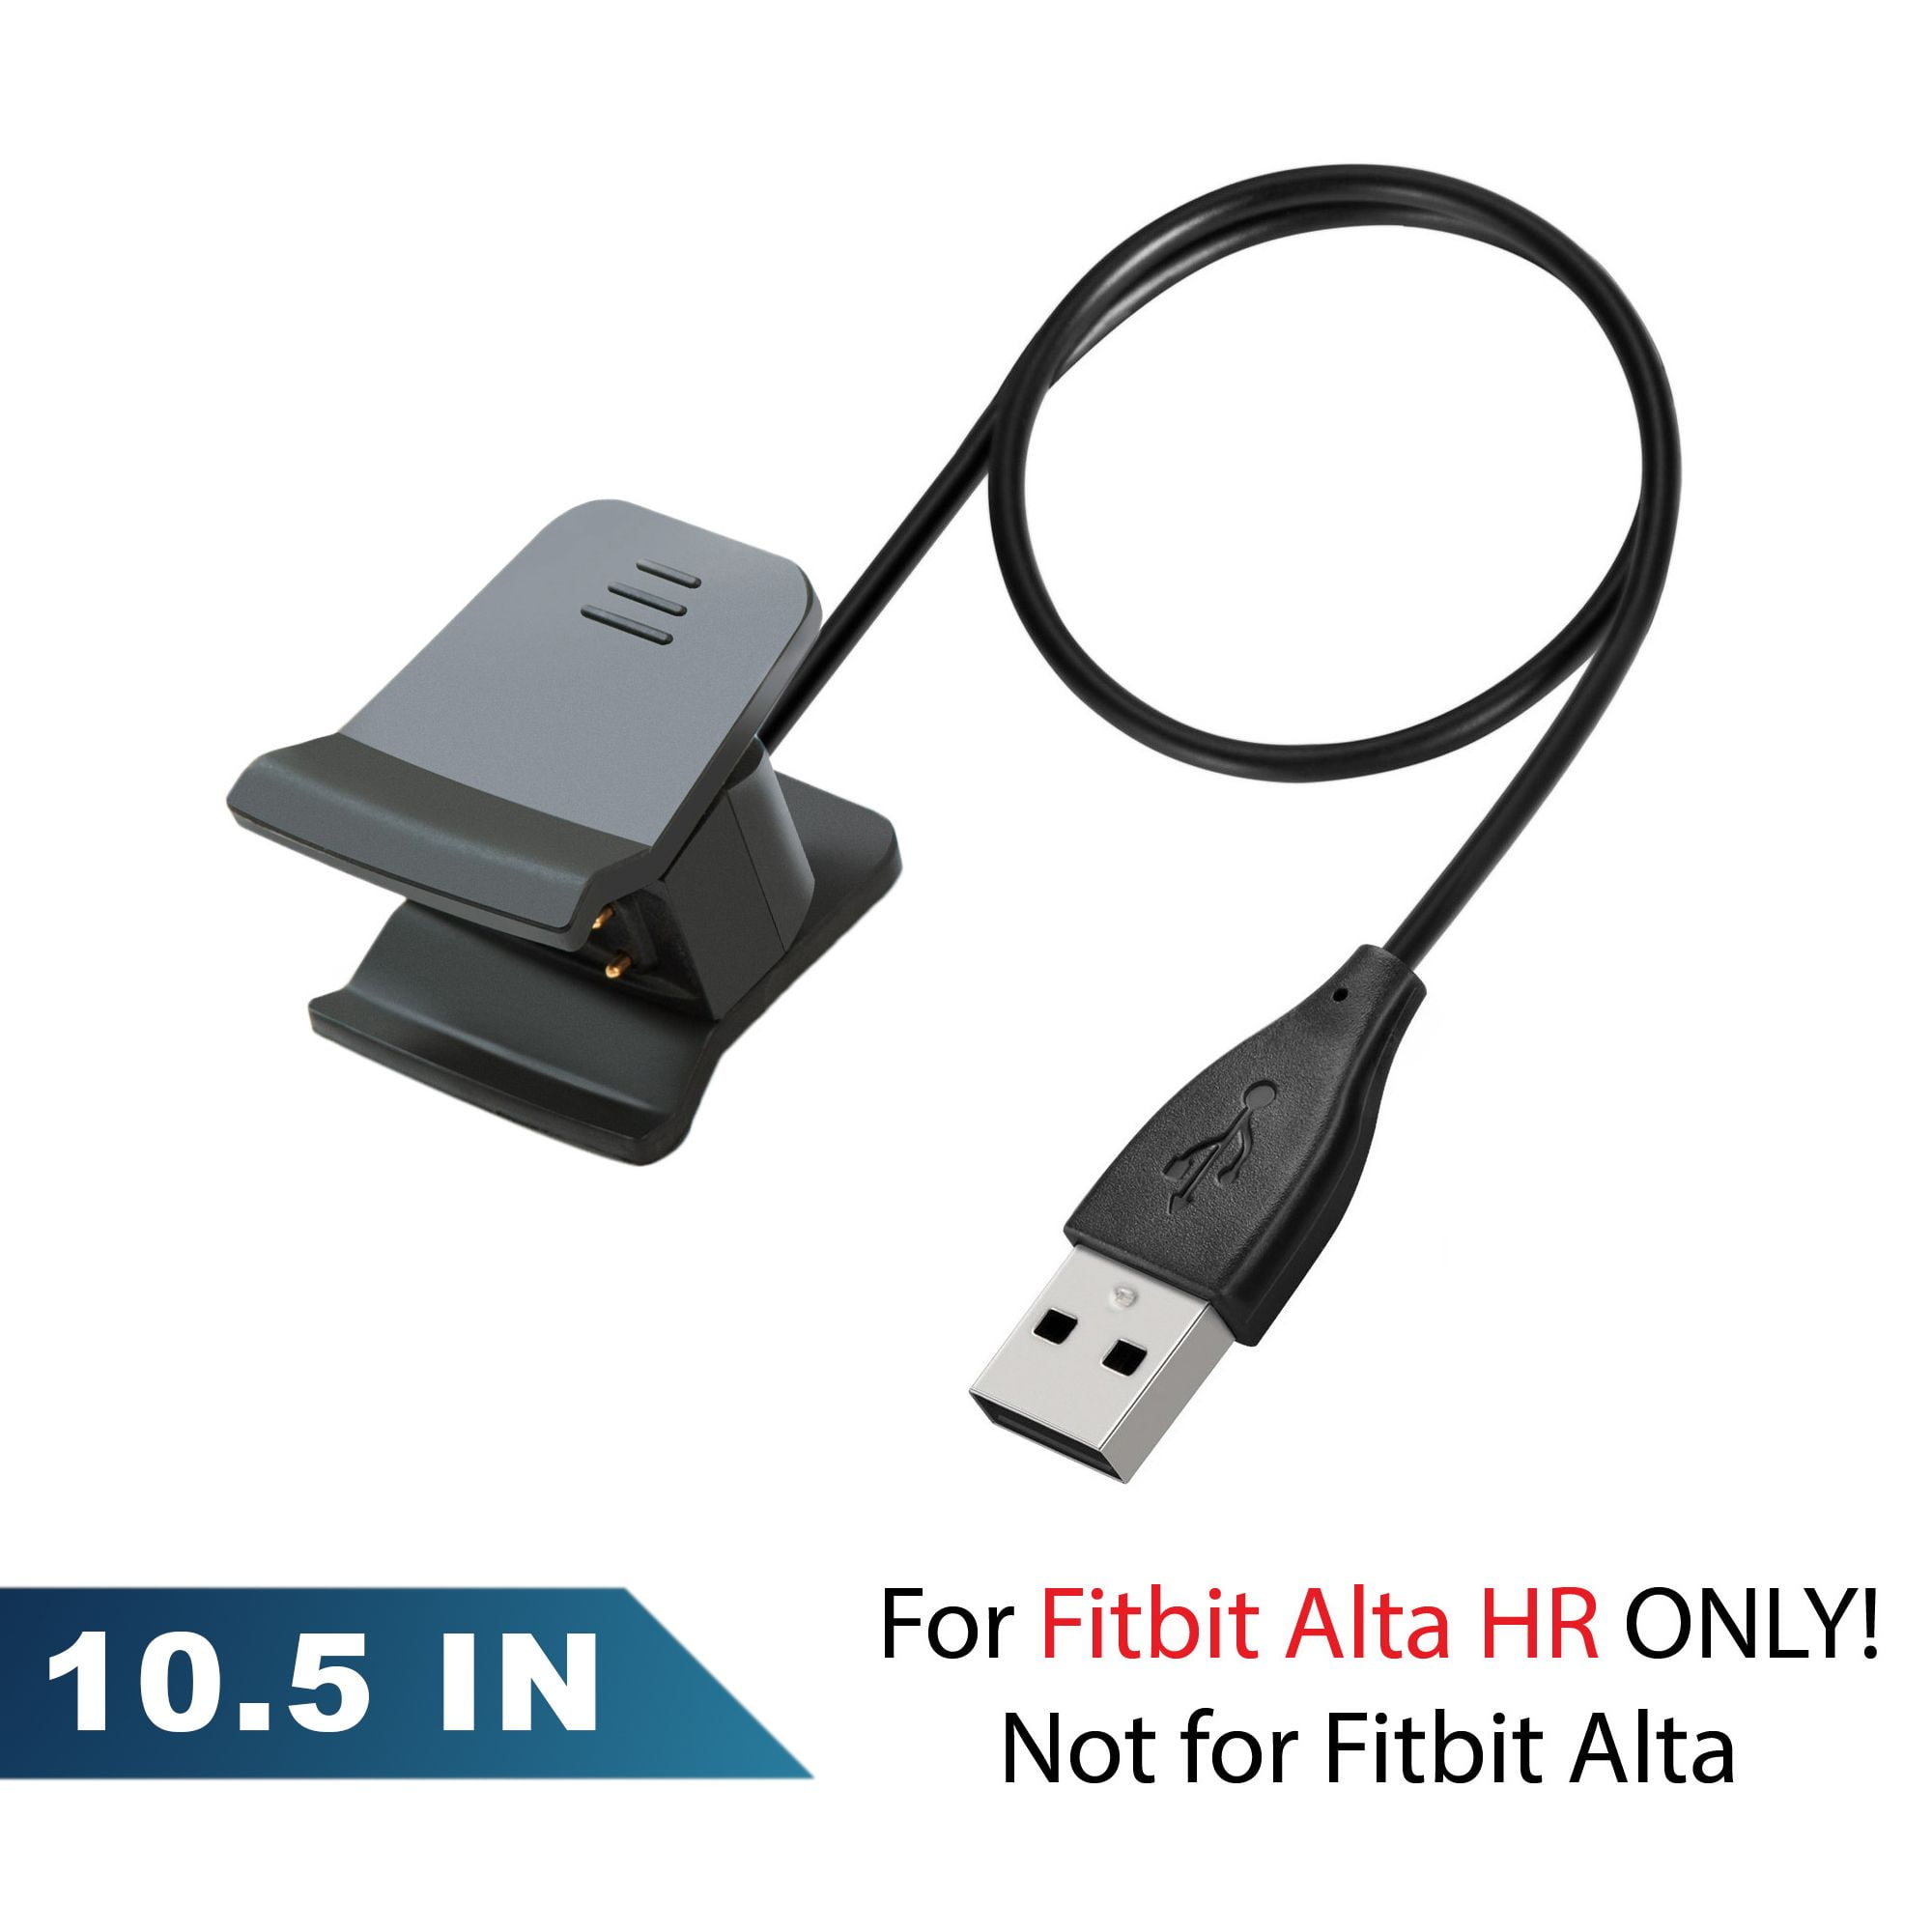 3 prong fitbit alta hr charger